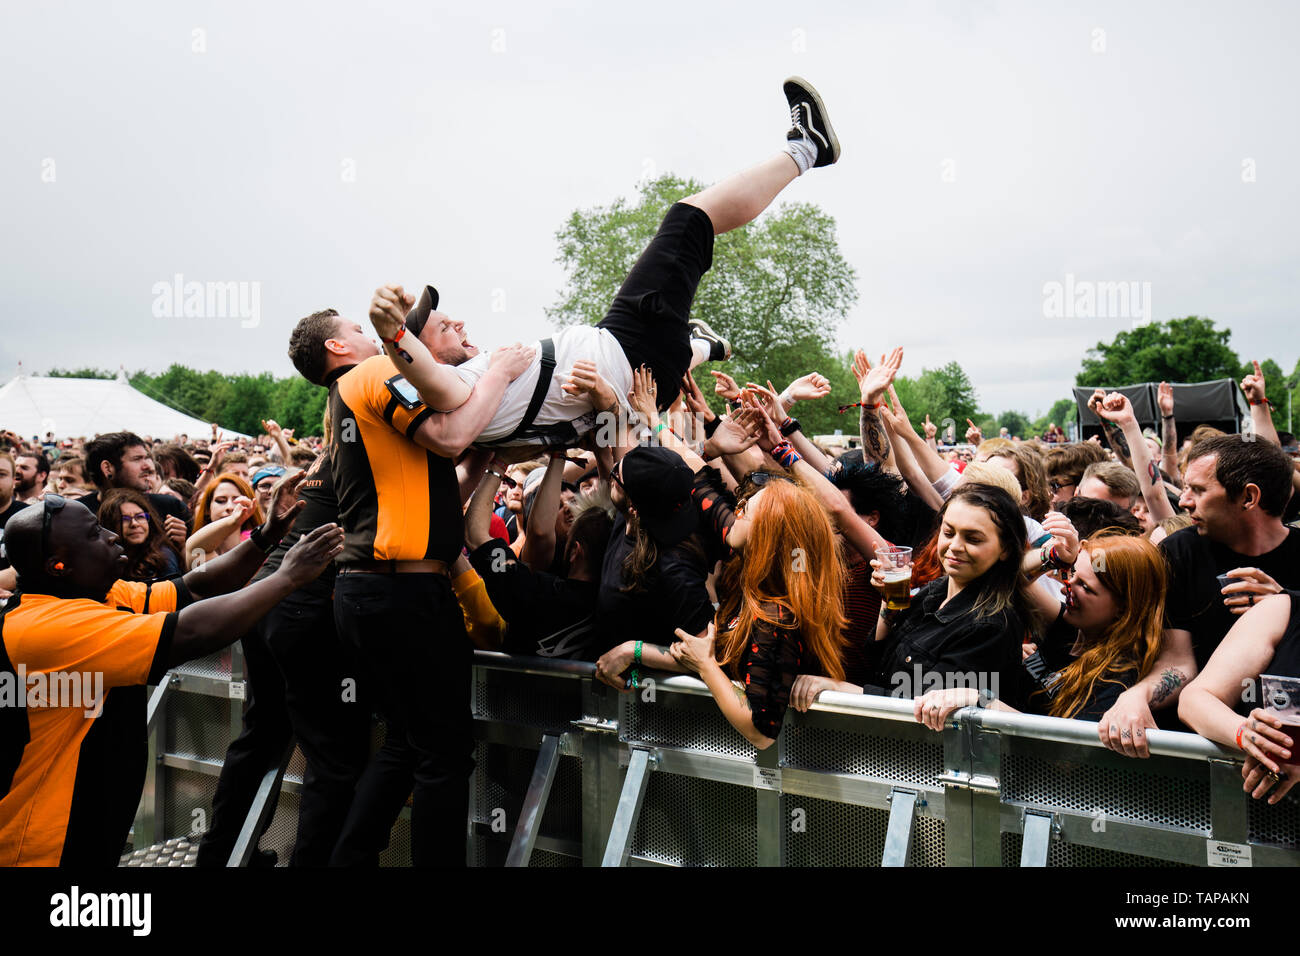 Hatfield, United Kingdom, 26th May 2019. Crowd surfers during Anti-flags performance at the Slam Dunk South Festival, Hatfield. It is the UK's biggest one day Independent Rock Festival. Credit: Richard Etteridge / Alamy Live News Stock Photo